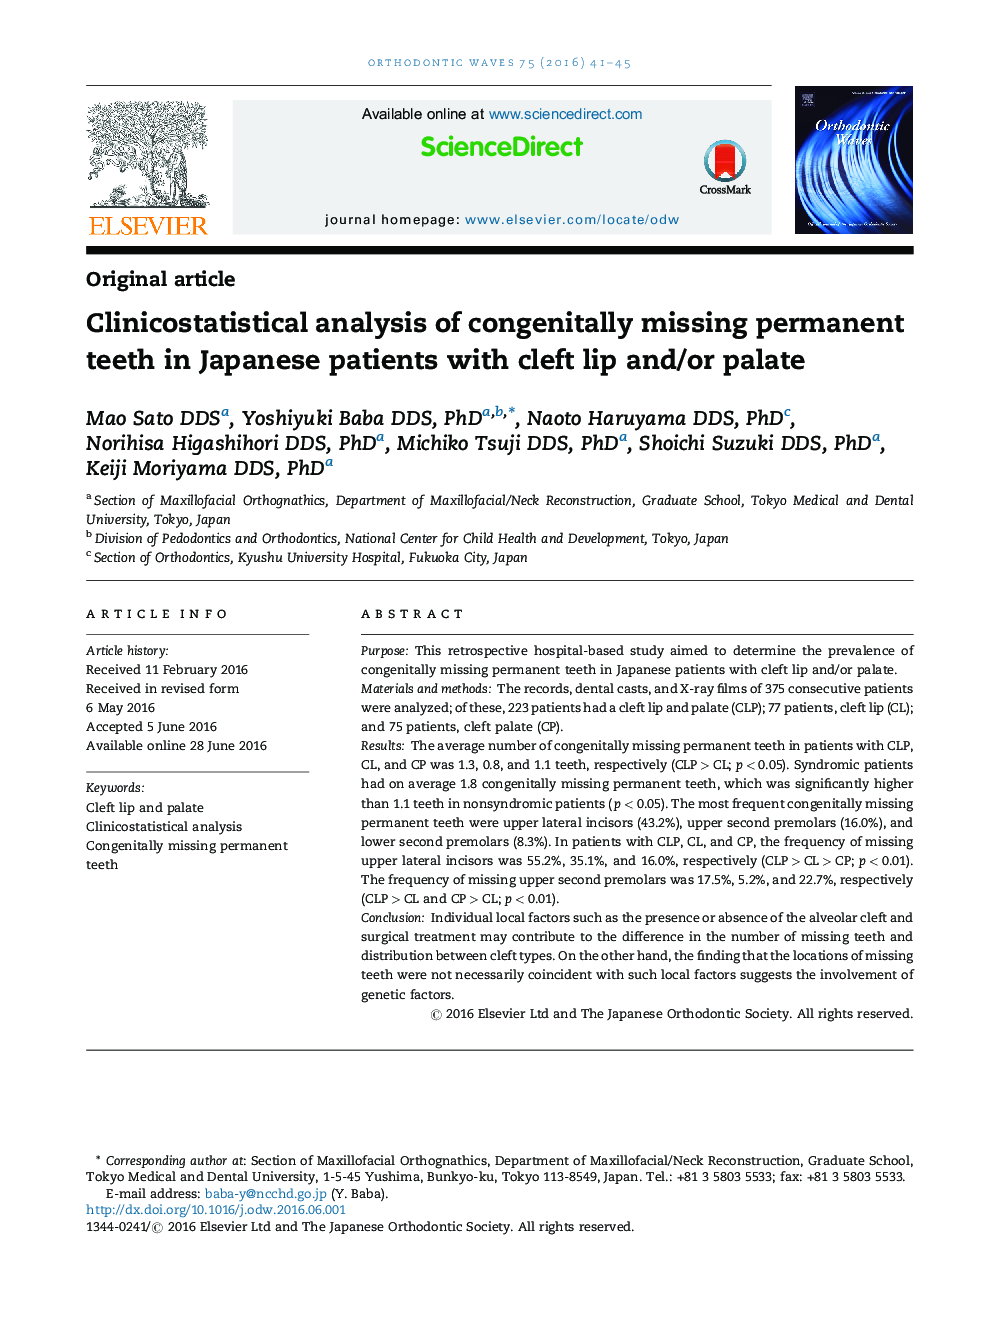 Clinicostatistical analysis of congenitally missing permanent teeth in Japanese patients with cleft lip and/or palate